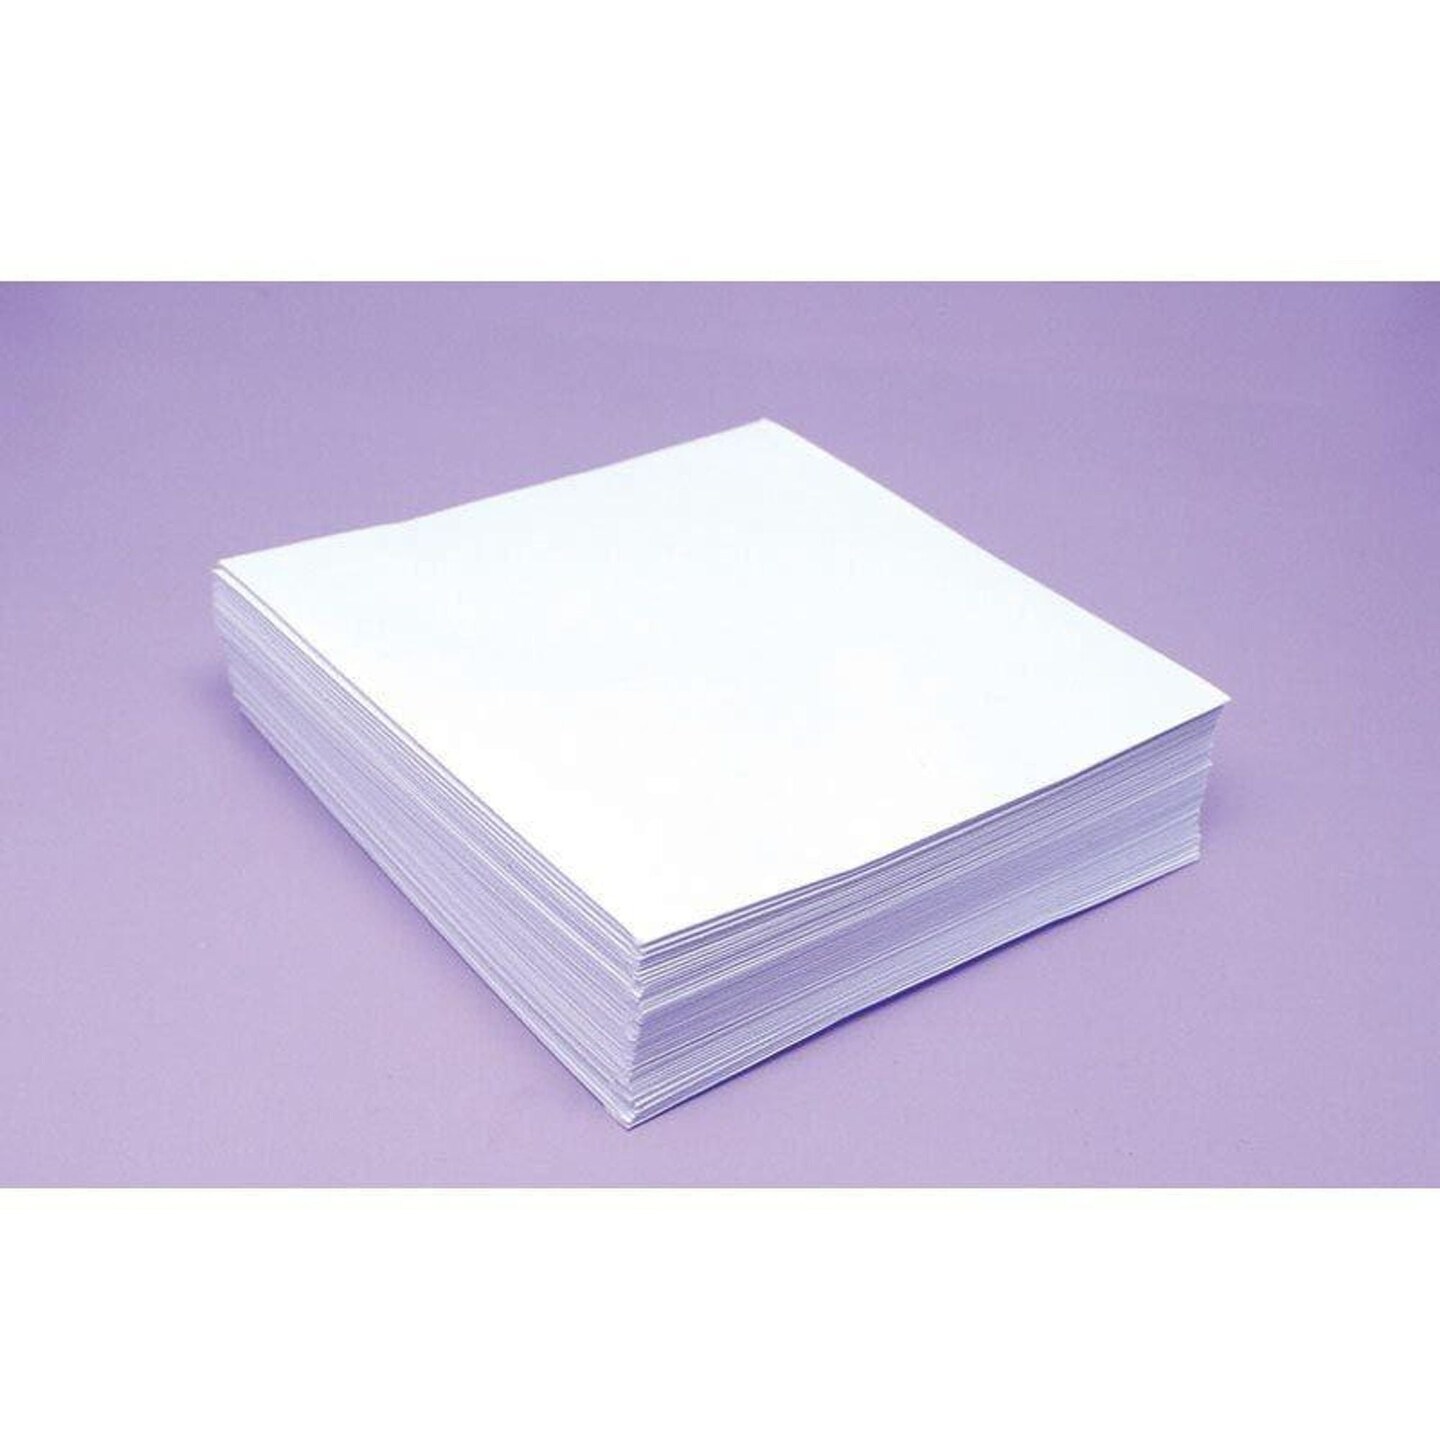 Hunkydory Crafts Bright White 100gsm Envelopes -Size 5 x 5 - Approx 50